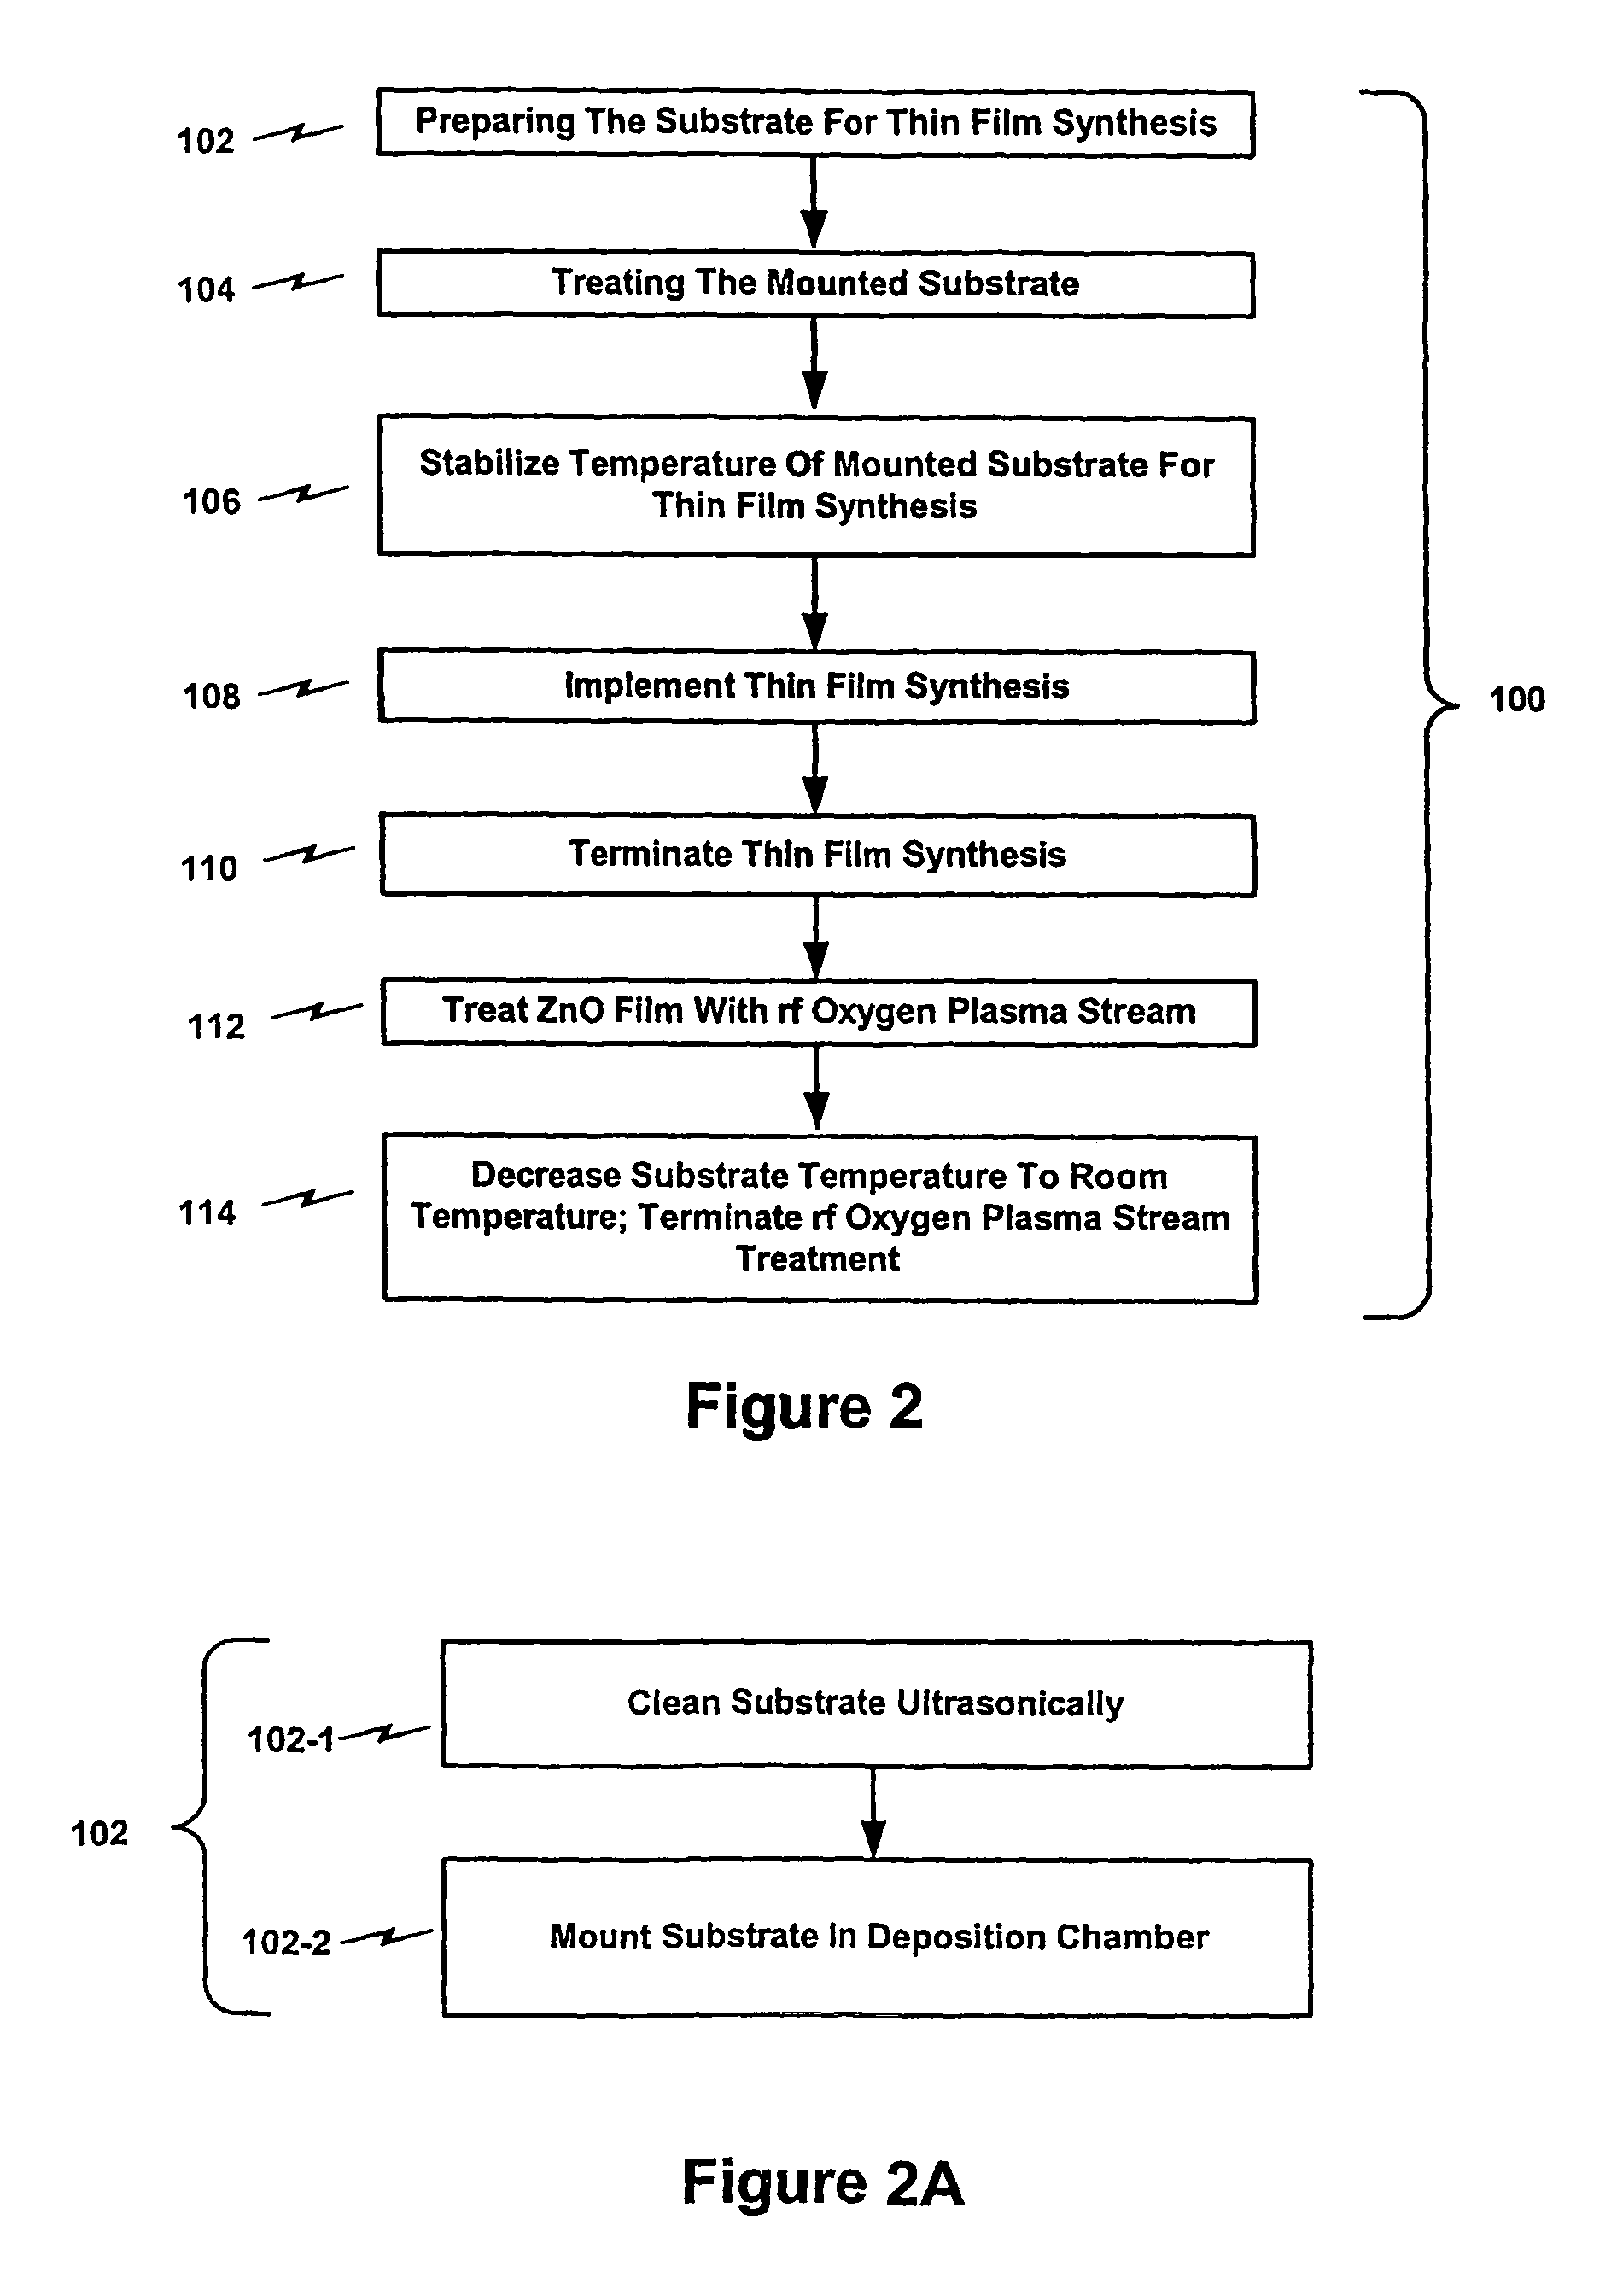 Hybrid beam deposition system and methods for fabricating metal oxide-ZnO films, p-type ZnO films, and ZnO-based II-VI compound semiconductor devices